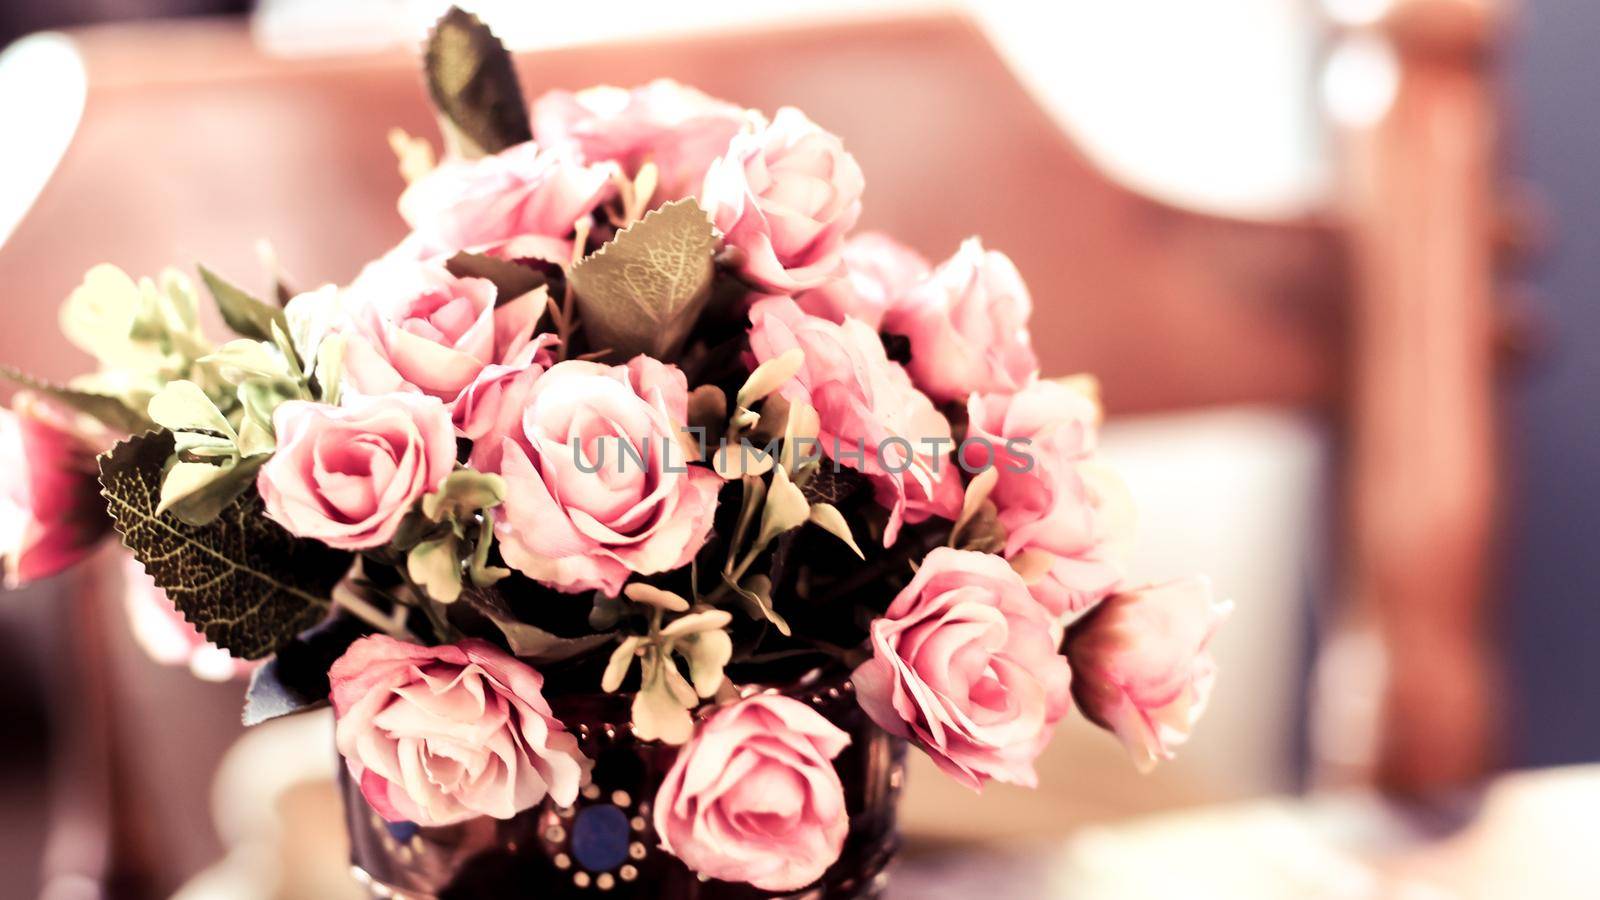 Bouquet vintage group of pink roses on wooden table, soft focus